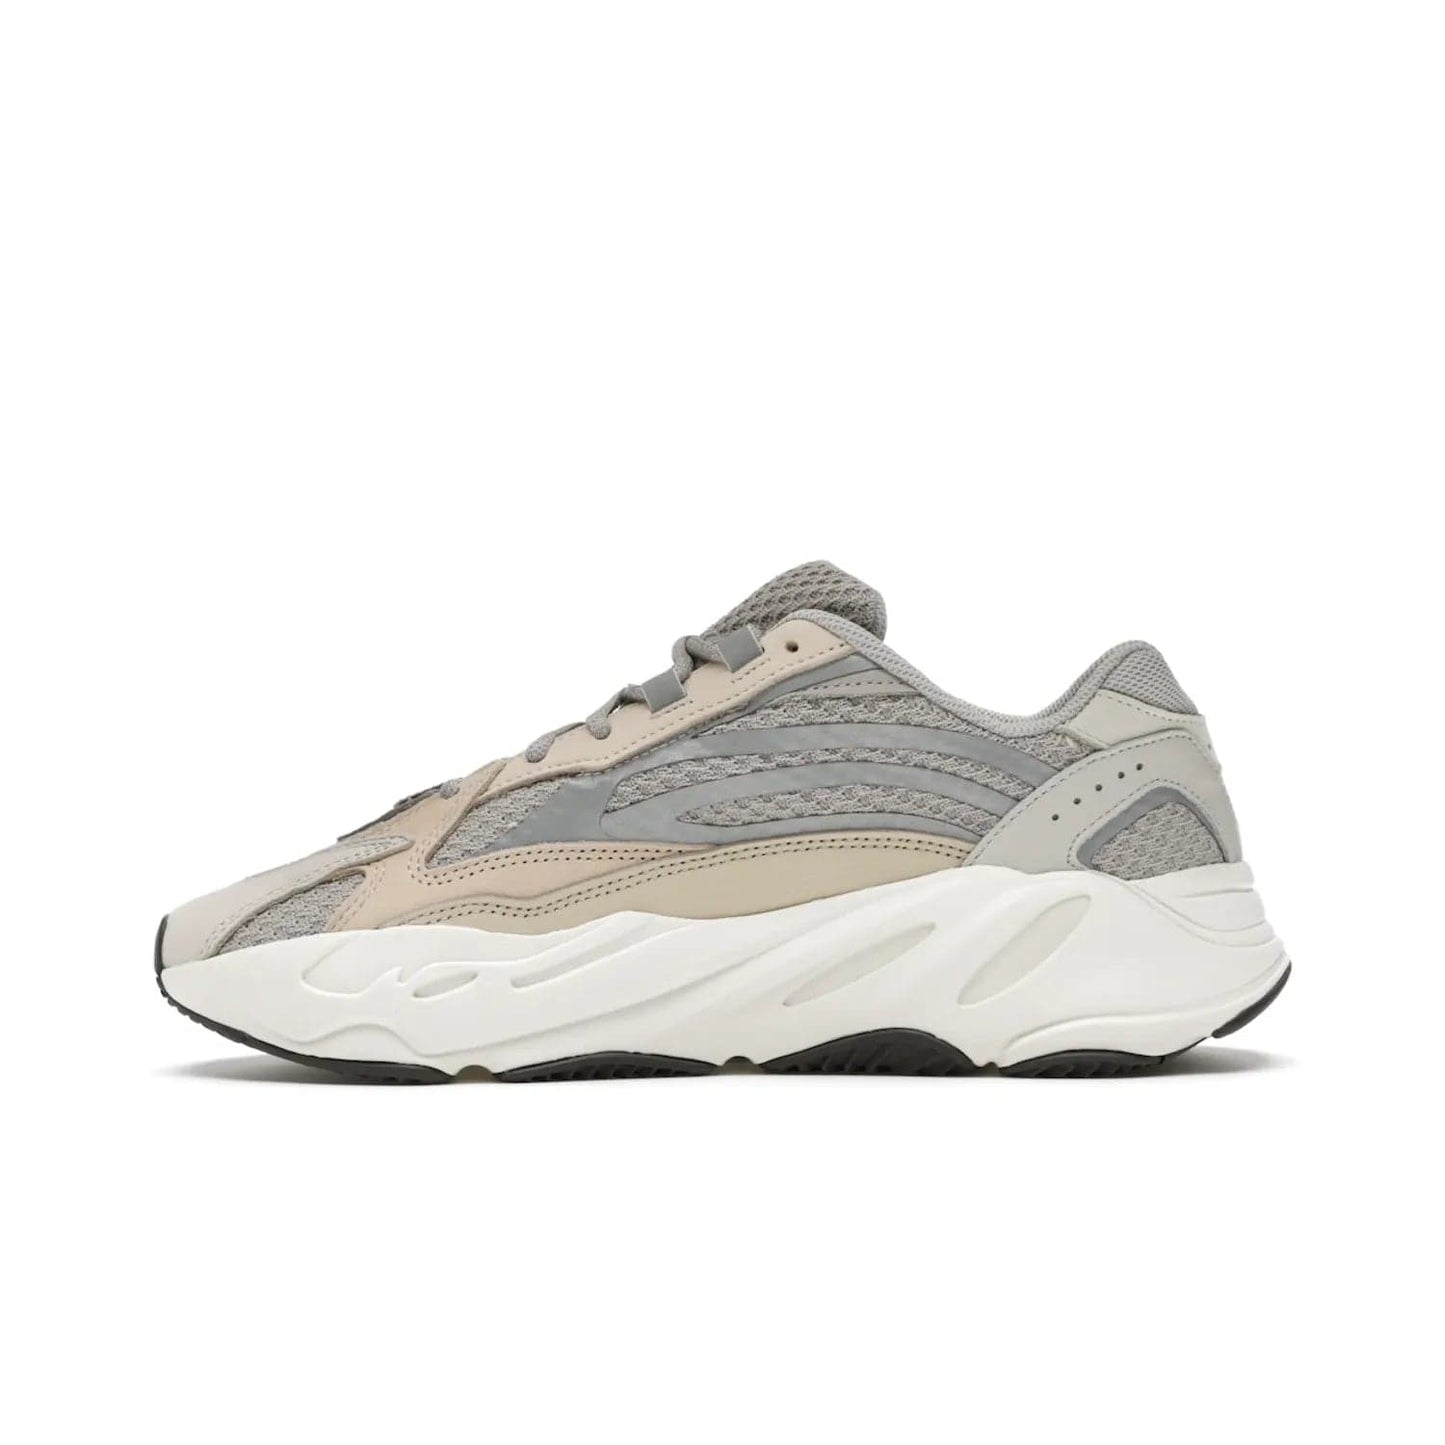 adidas Yeezy Boost 700 V2 Cream - Image 19 - Only at www.BallersClubKickz.com - Add style and luxury to your wardrobe with the adidas Yeezy 700 V2 Cream. Featuring a unique reflective upper, leather overlays, mesh underlays and the signature BOOST midsole, this silhouette is perfect for any stylish wardrobe.